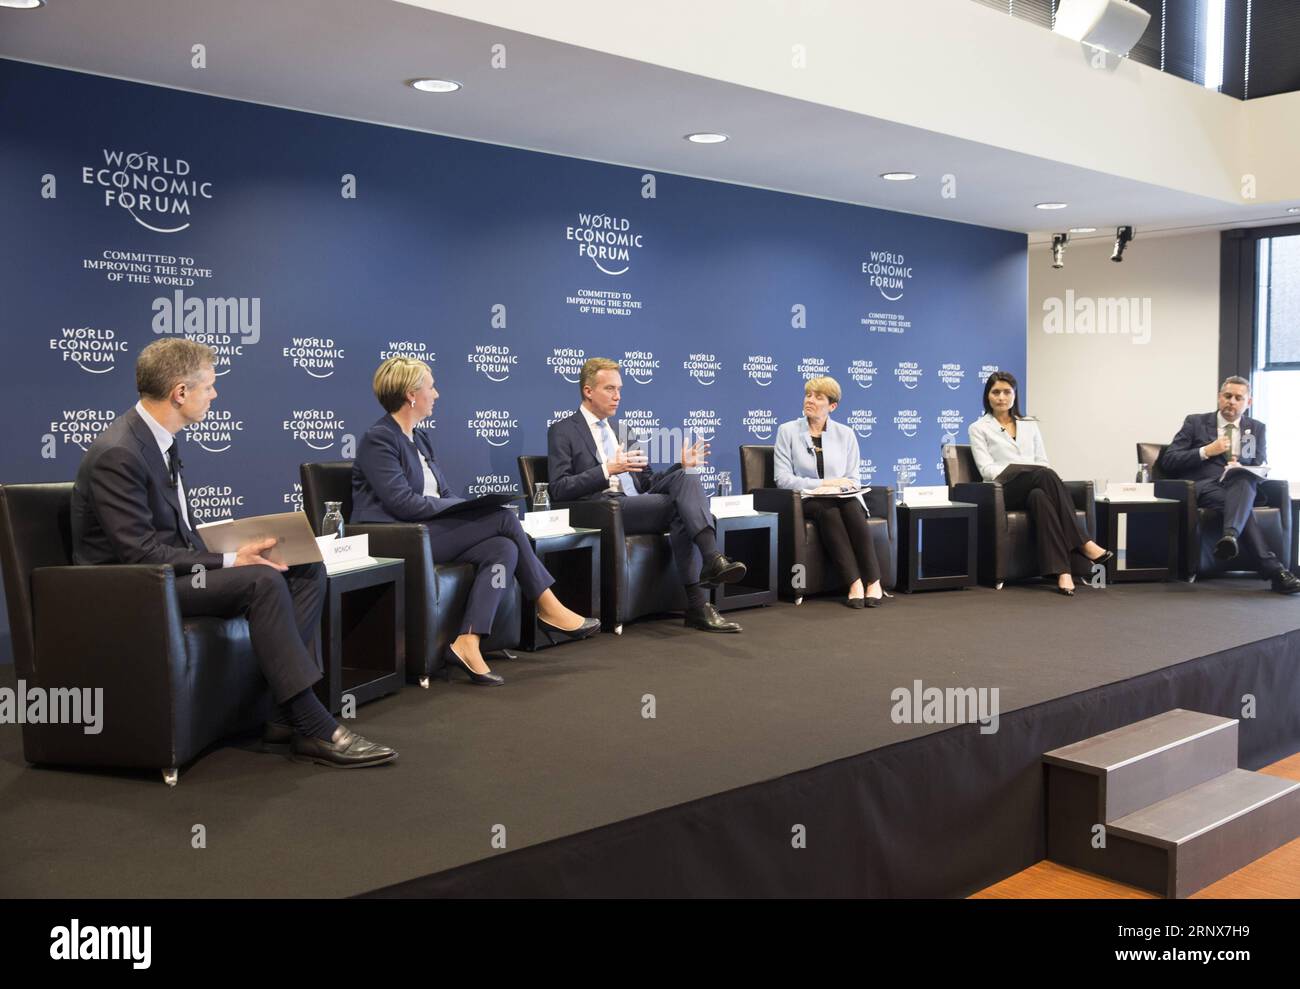 (180116) -- GENEVA, Jan. 16, 2018 -- Borge Brende (3rd L), the president of the World Economic Forum (WEF), gestures at a press conference in Geneva, Switzerland, Jan. 16, 2018. Some 70 heads of state and government and 38 heads of international organizations will debate creating a shared future in a fractured world -- the theme of this year s World Economic Forum in Davos from Jan. 23 to Jan. 26. ) SWITZERLAND-GENEVA-WORLD ECONOMIC FORUM-PRESS CONFERENCE XuxJinquan PUBLICATIONxNOTxINxCHN Stock Photo